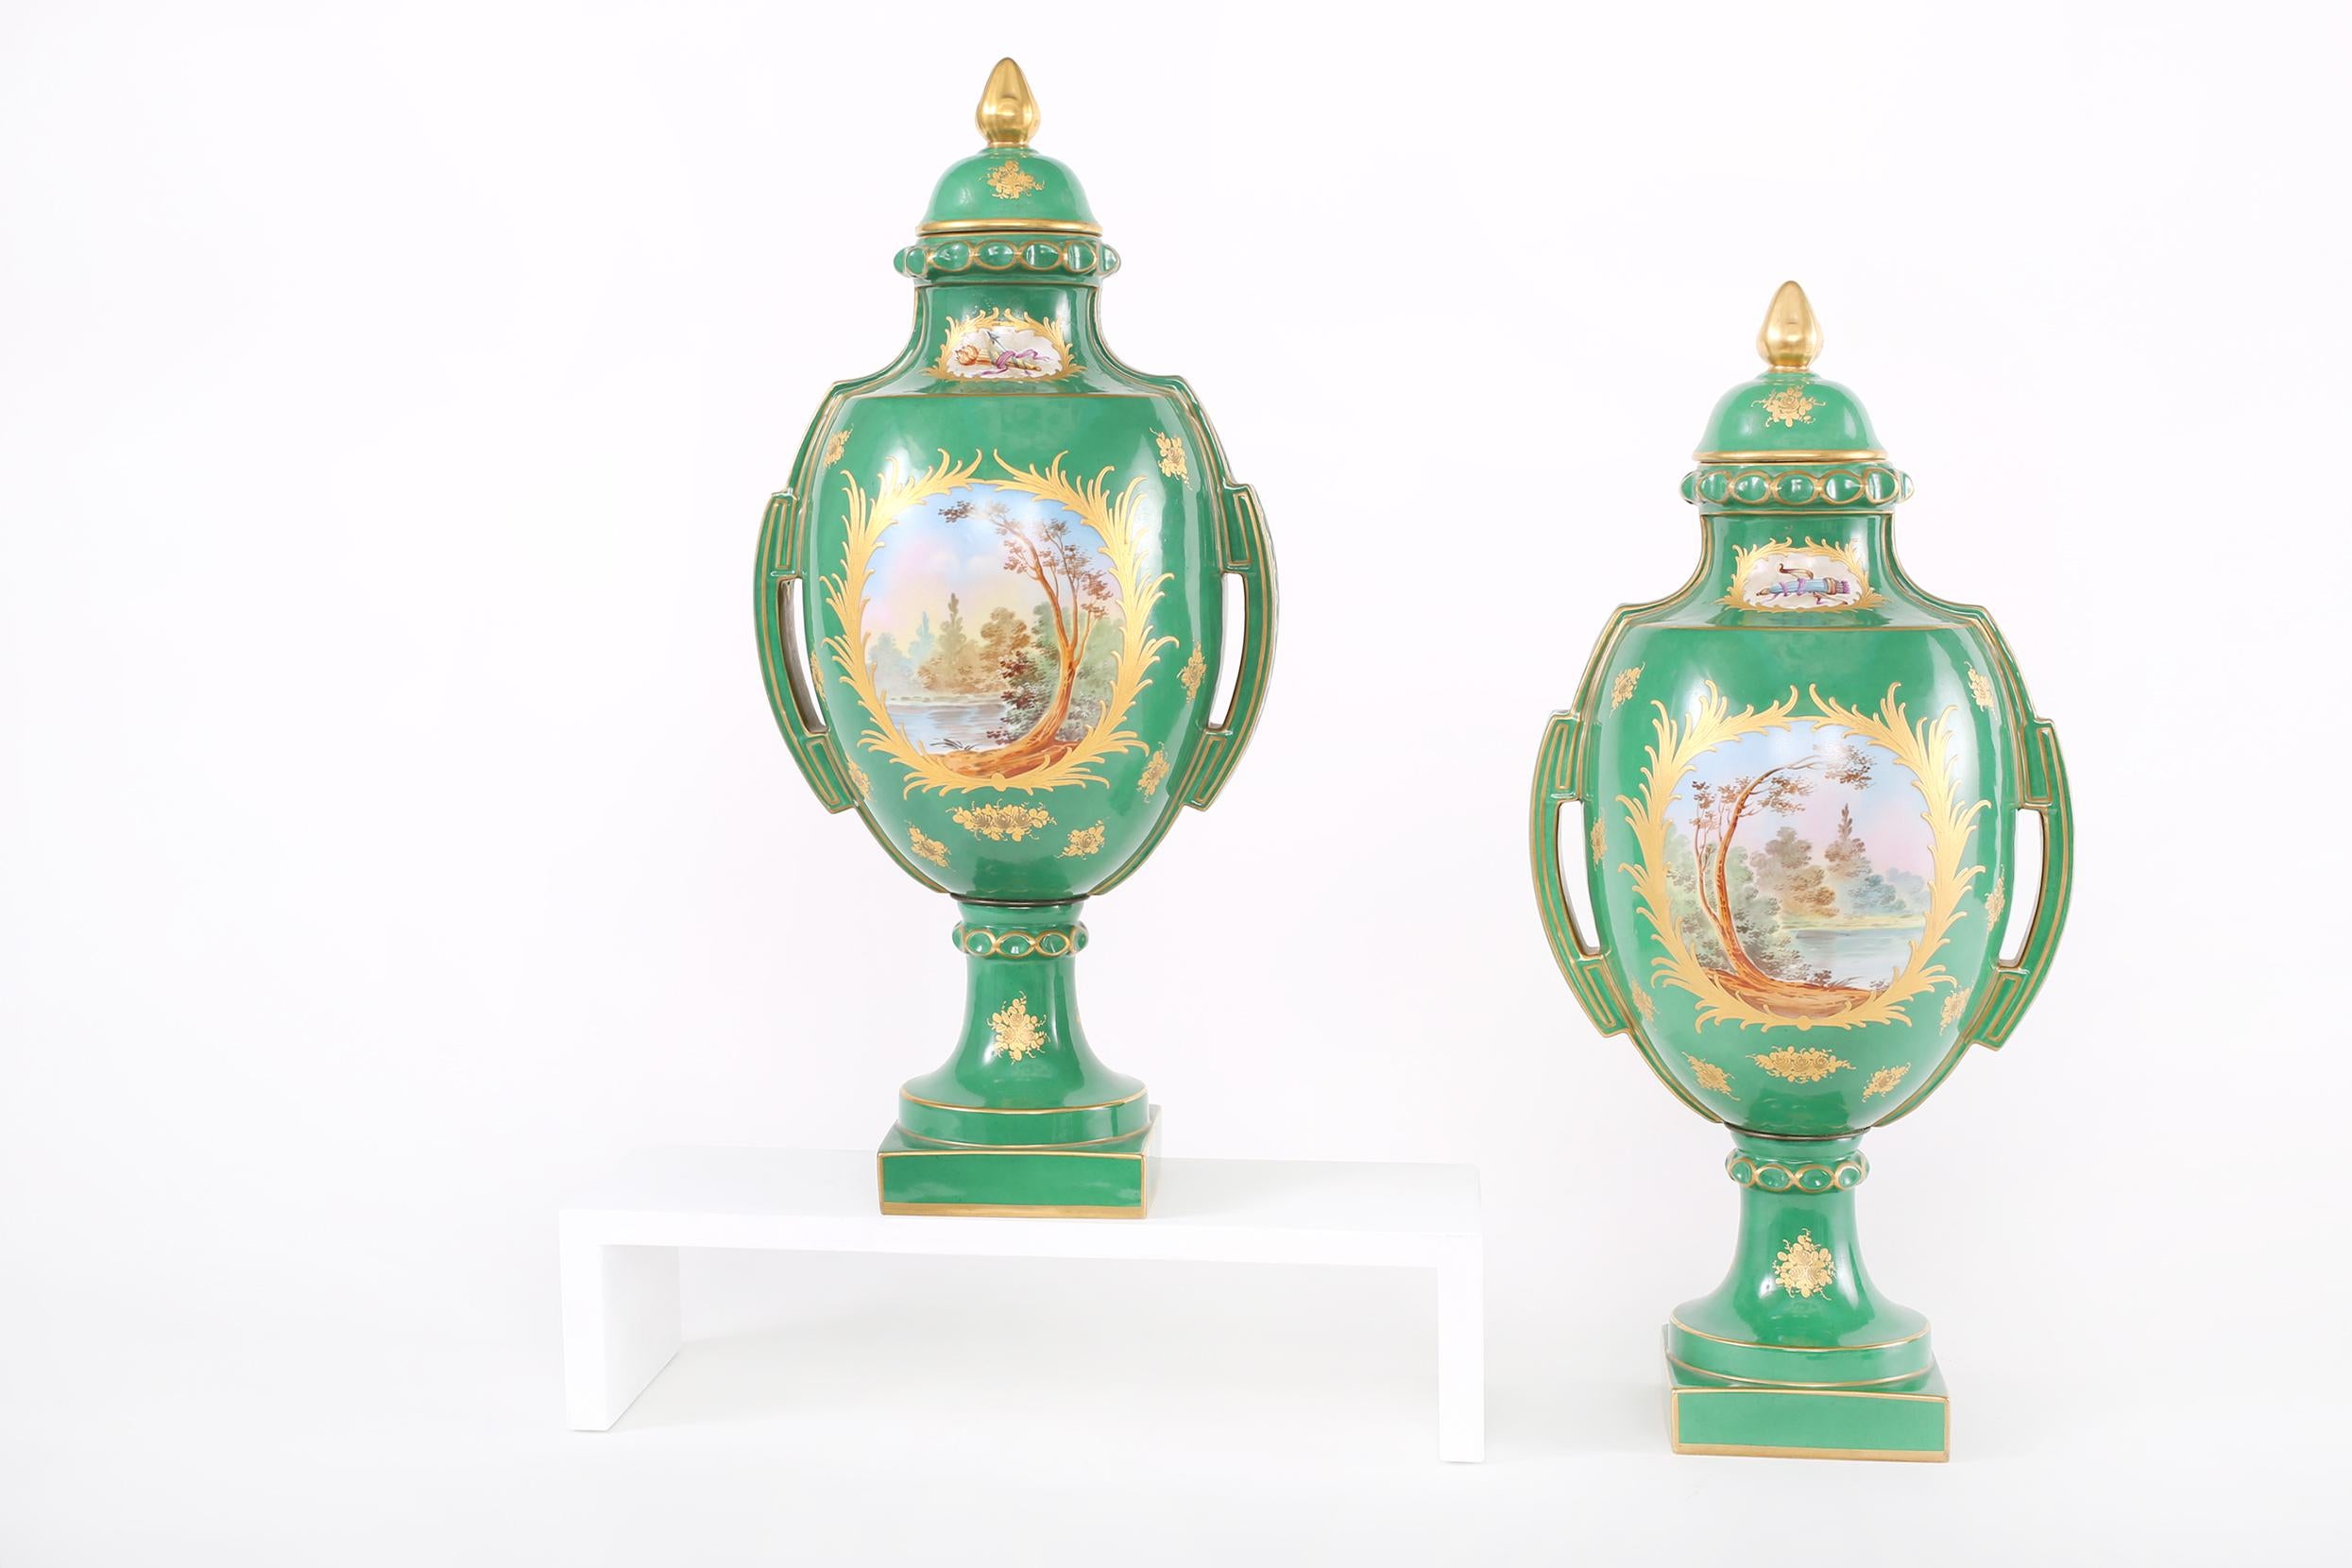 Pair gilt porcelain Dresden covered decorative urns / pieces with exterior painted scene design details. Each urn is in great condition with appropriate wear consistent with age / use. Maker's mark undersigned. Each piece stands about 20.5 inches